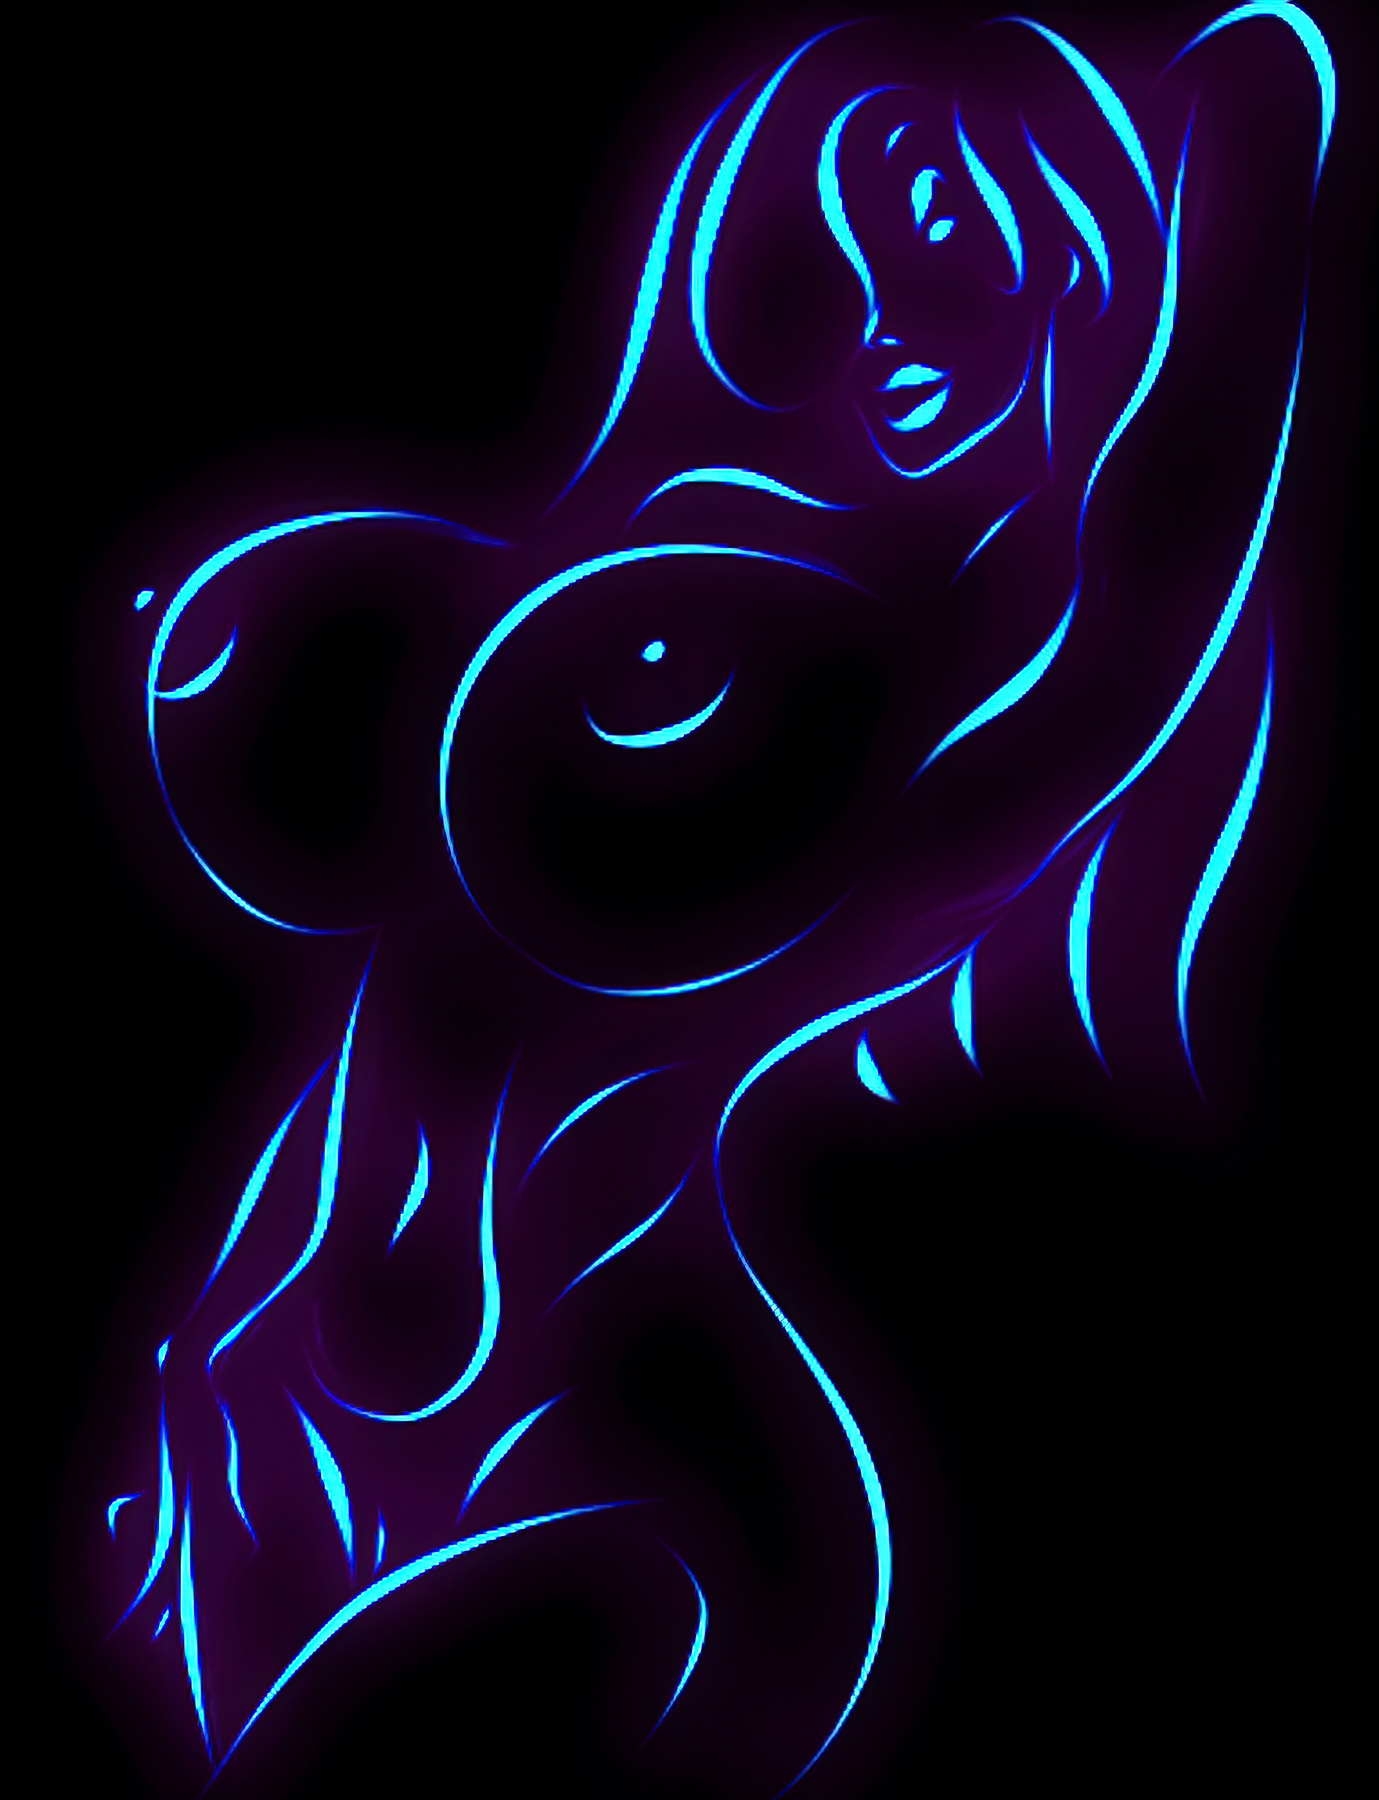 The contour silhouette of a young girl. breast erotic glamour ideal naked nude perfect perfection illustration drawing art digital sensual skin vogue elegance gorgeous lady sexy body curly female model posing pretty adult attractive beauty black fashion woman young artistic babe bare charming d